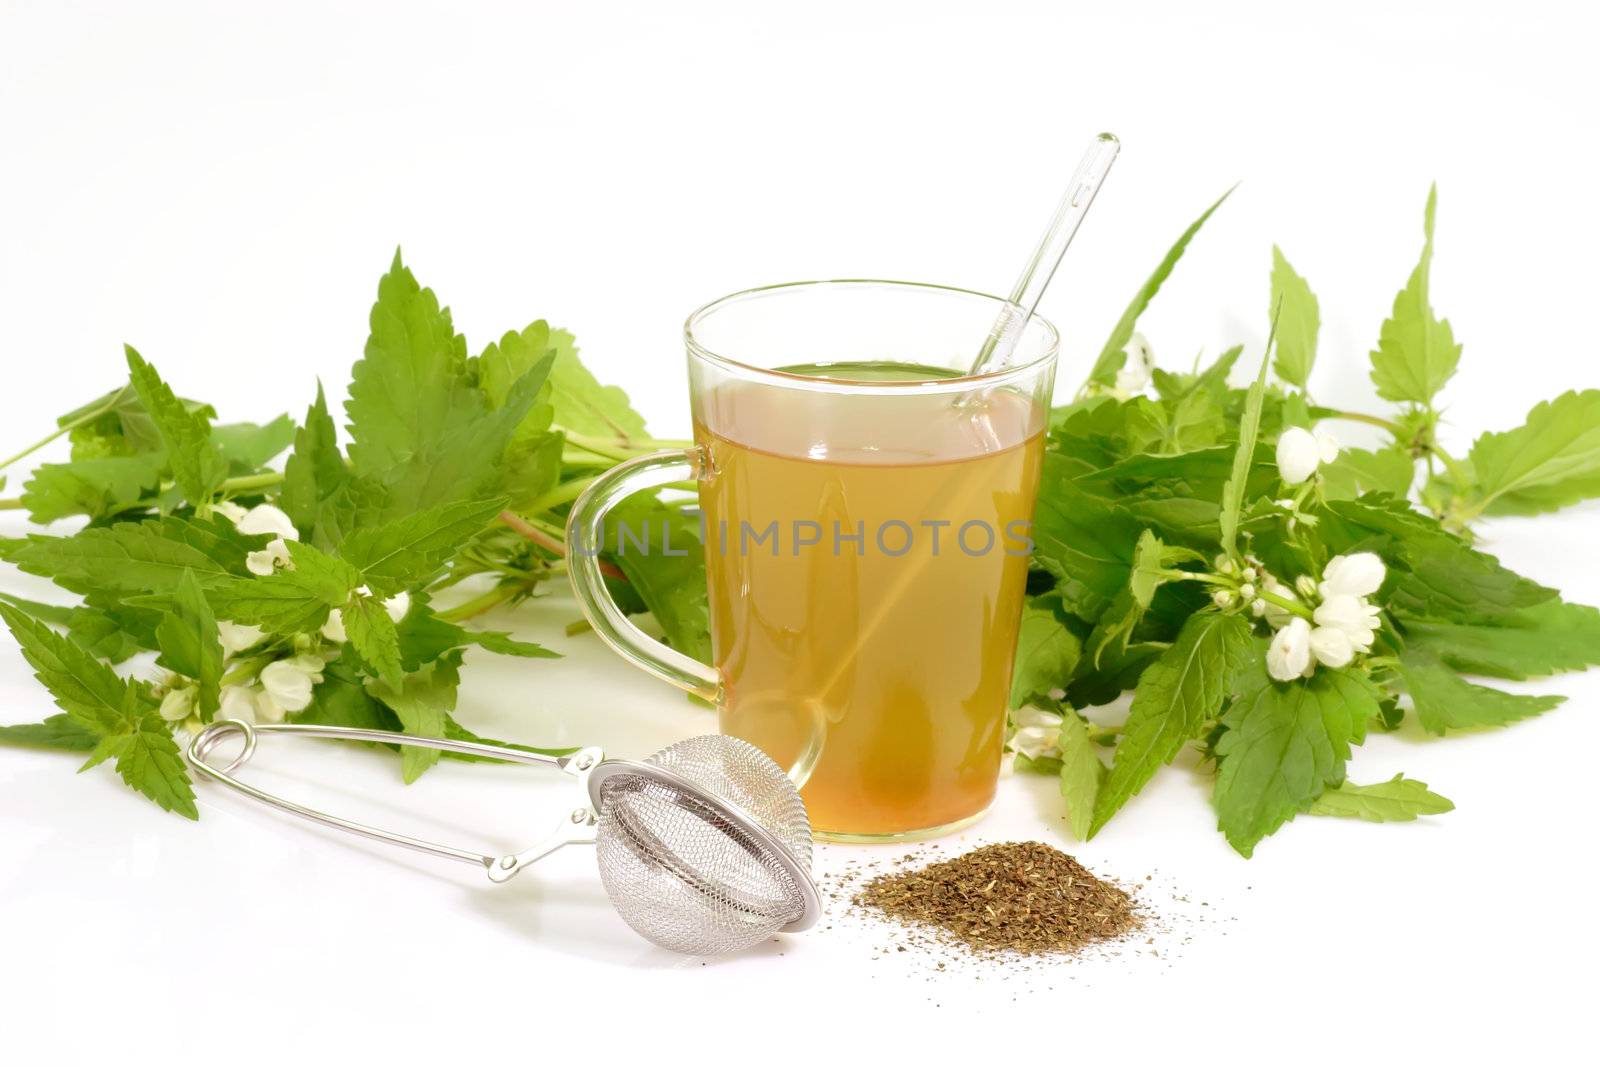 A cup of herb tea with stinging nettle on bright background